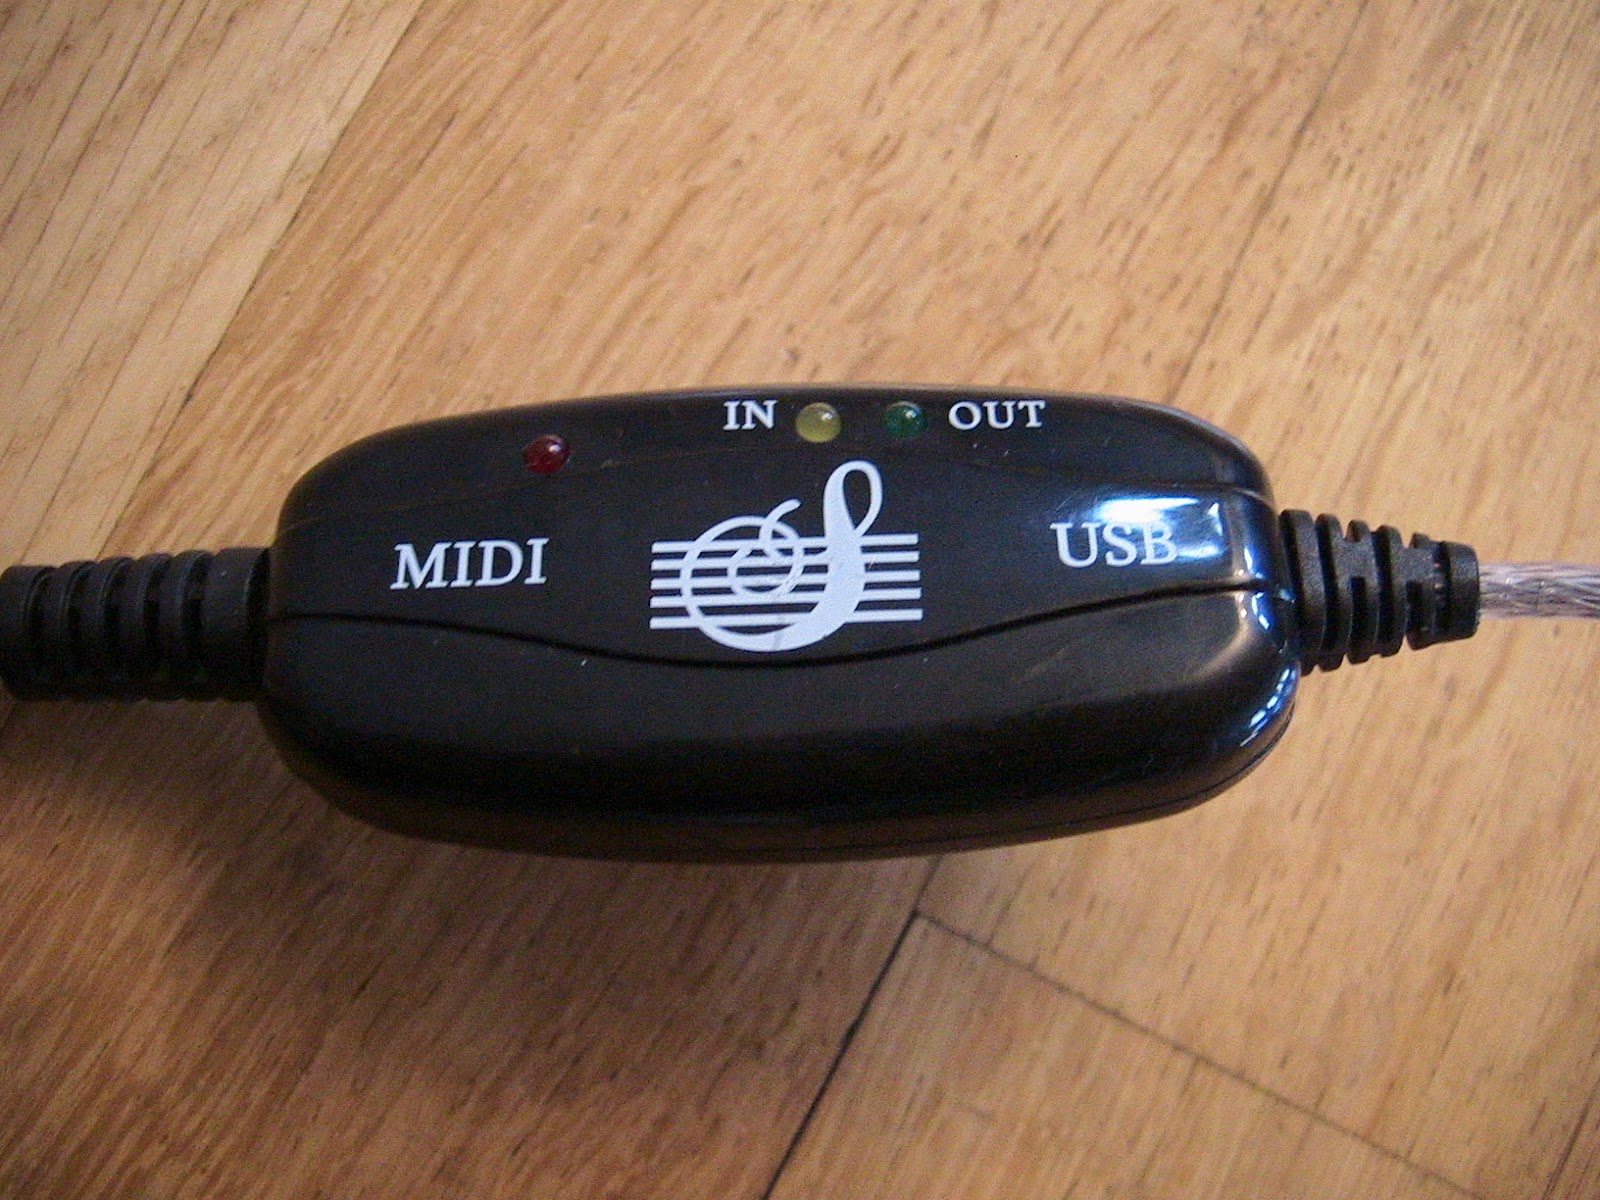 Walkthroughs, Unboxings and Other stuff: REVIEW OF USB 2.0 to MIDI